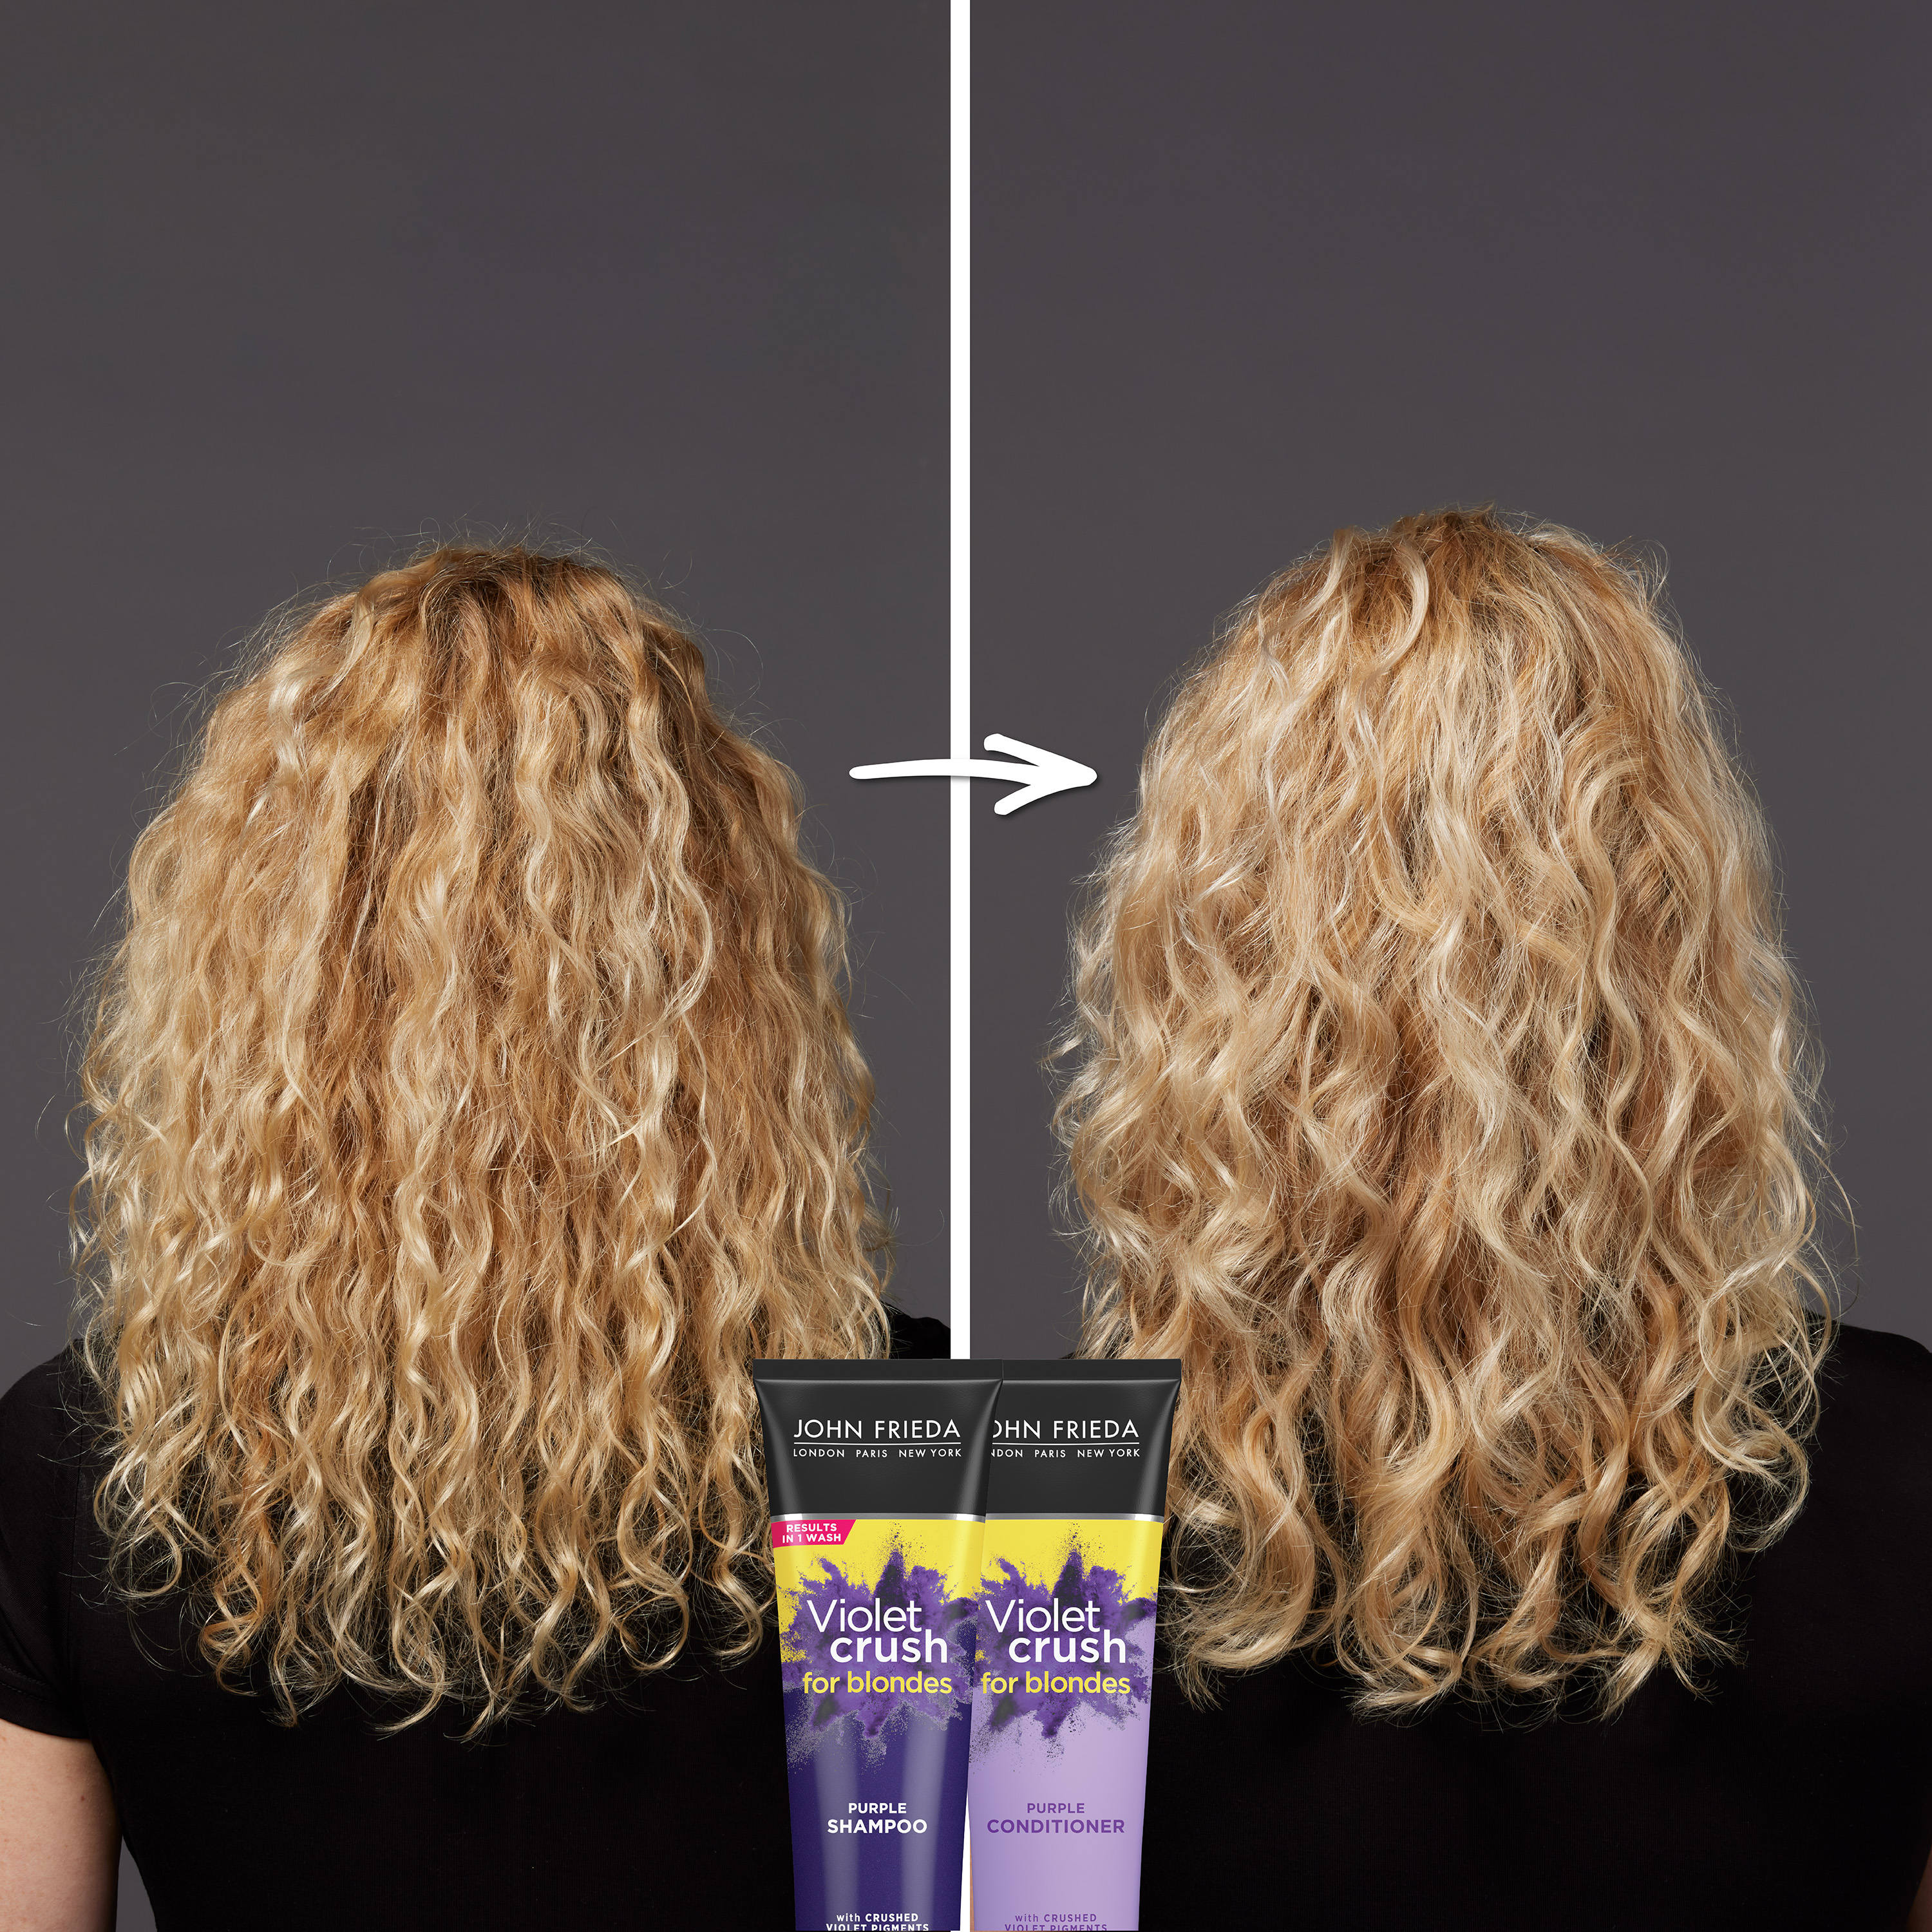 Hair before/after using the Violet Crush Collection.